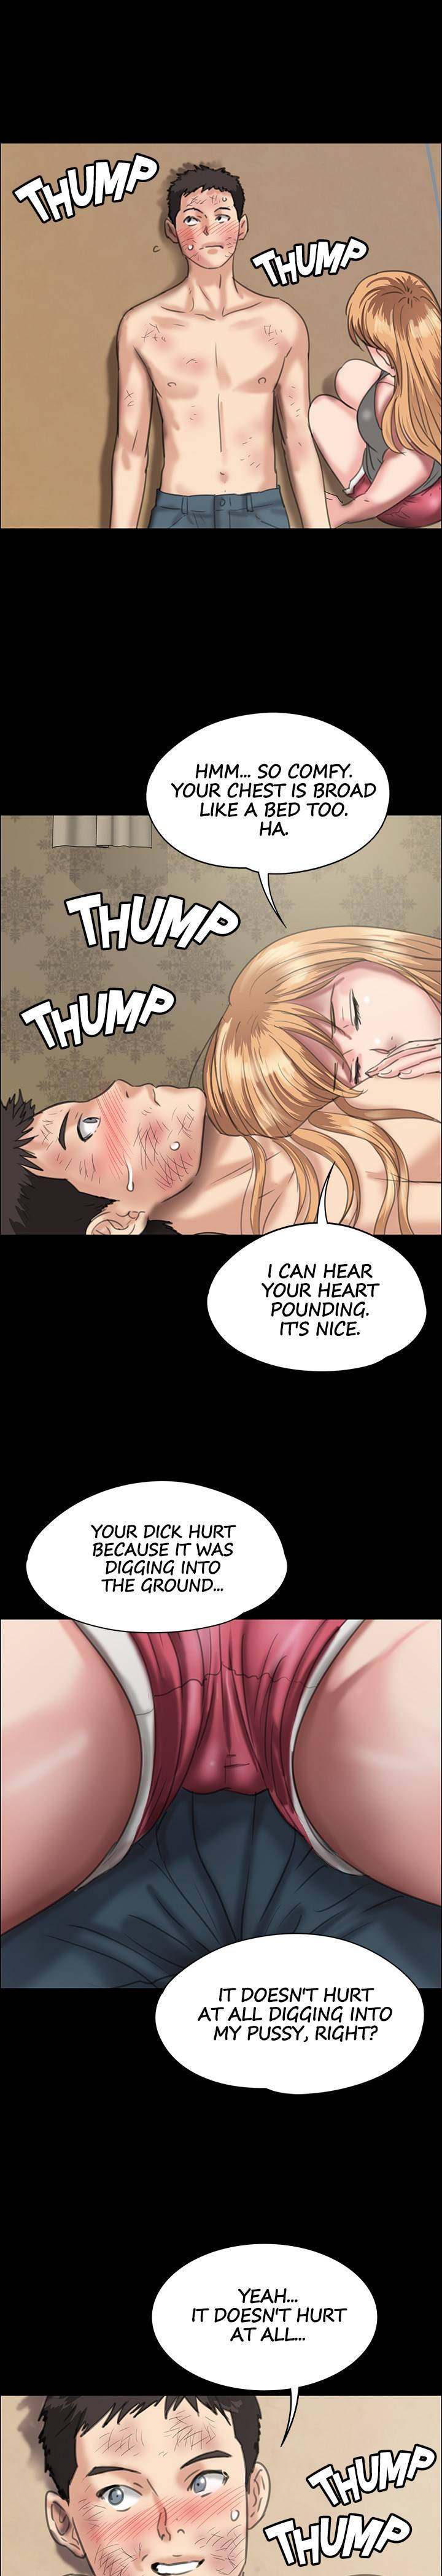 Panel Image 1 for chapter 29 of manhwa Queen Bee on read.oppai.stream